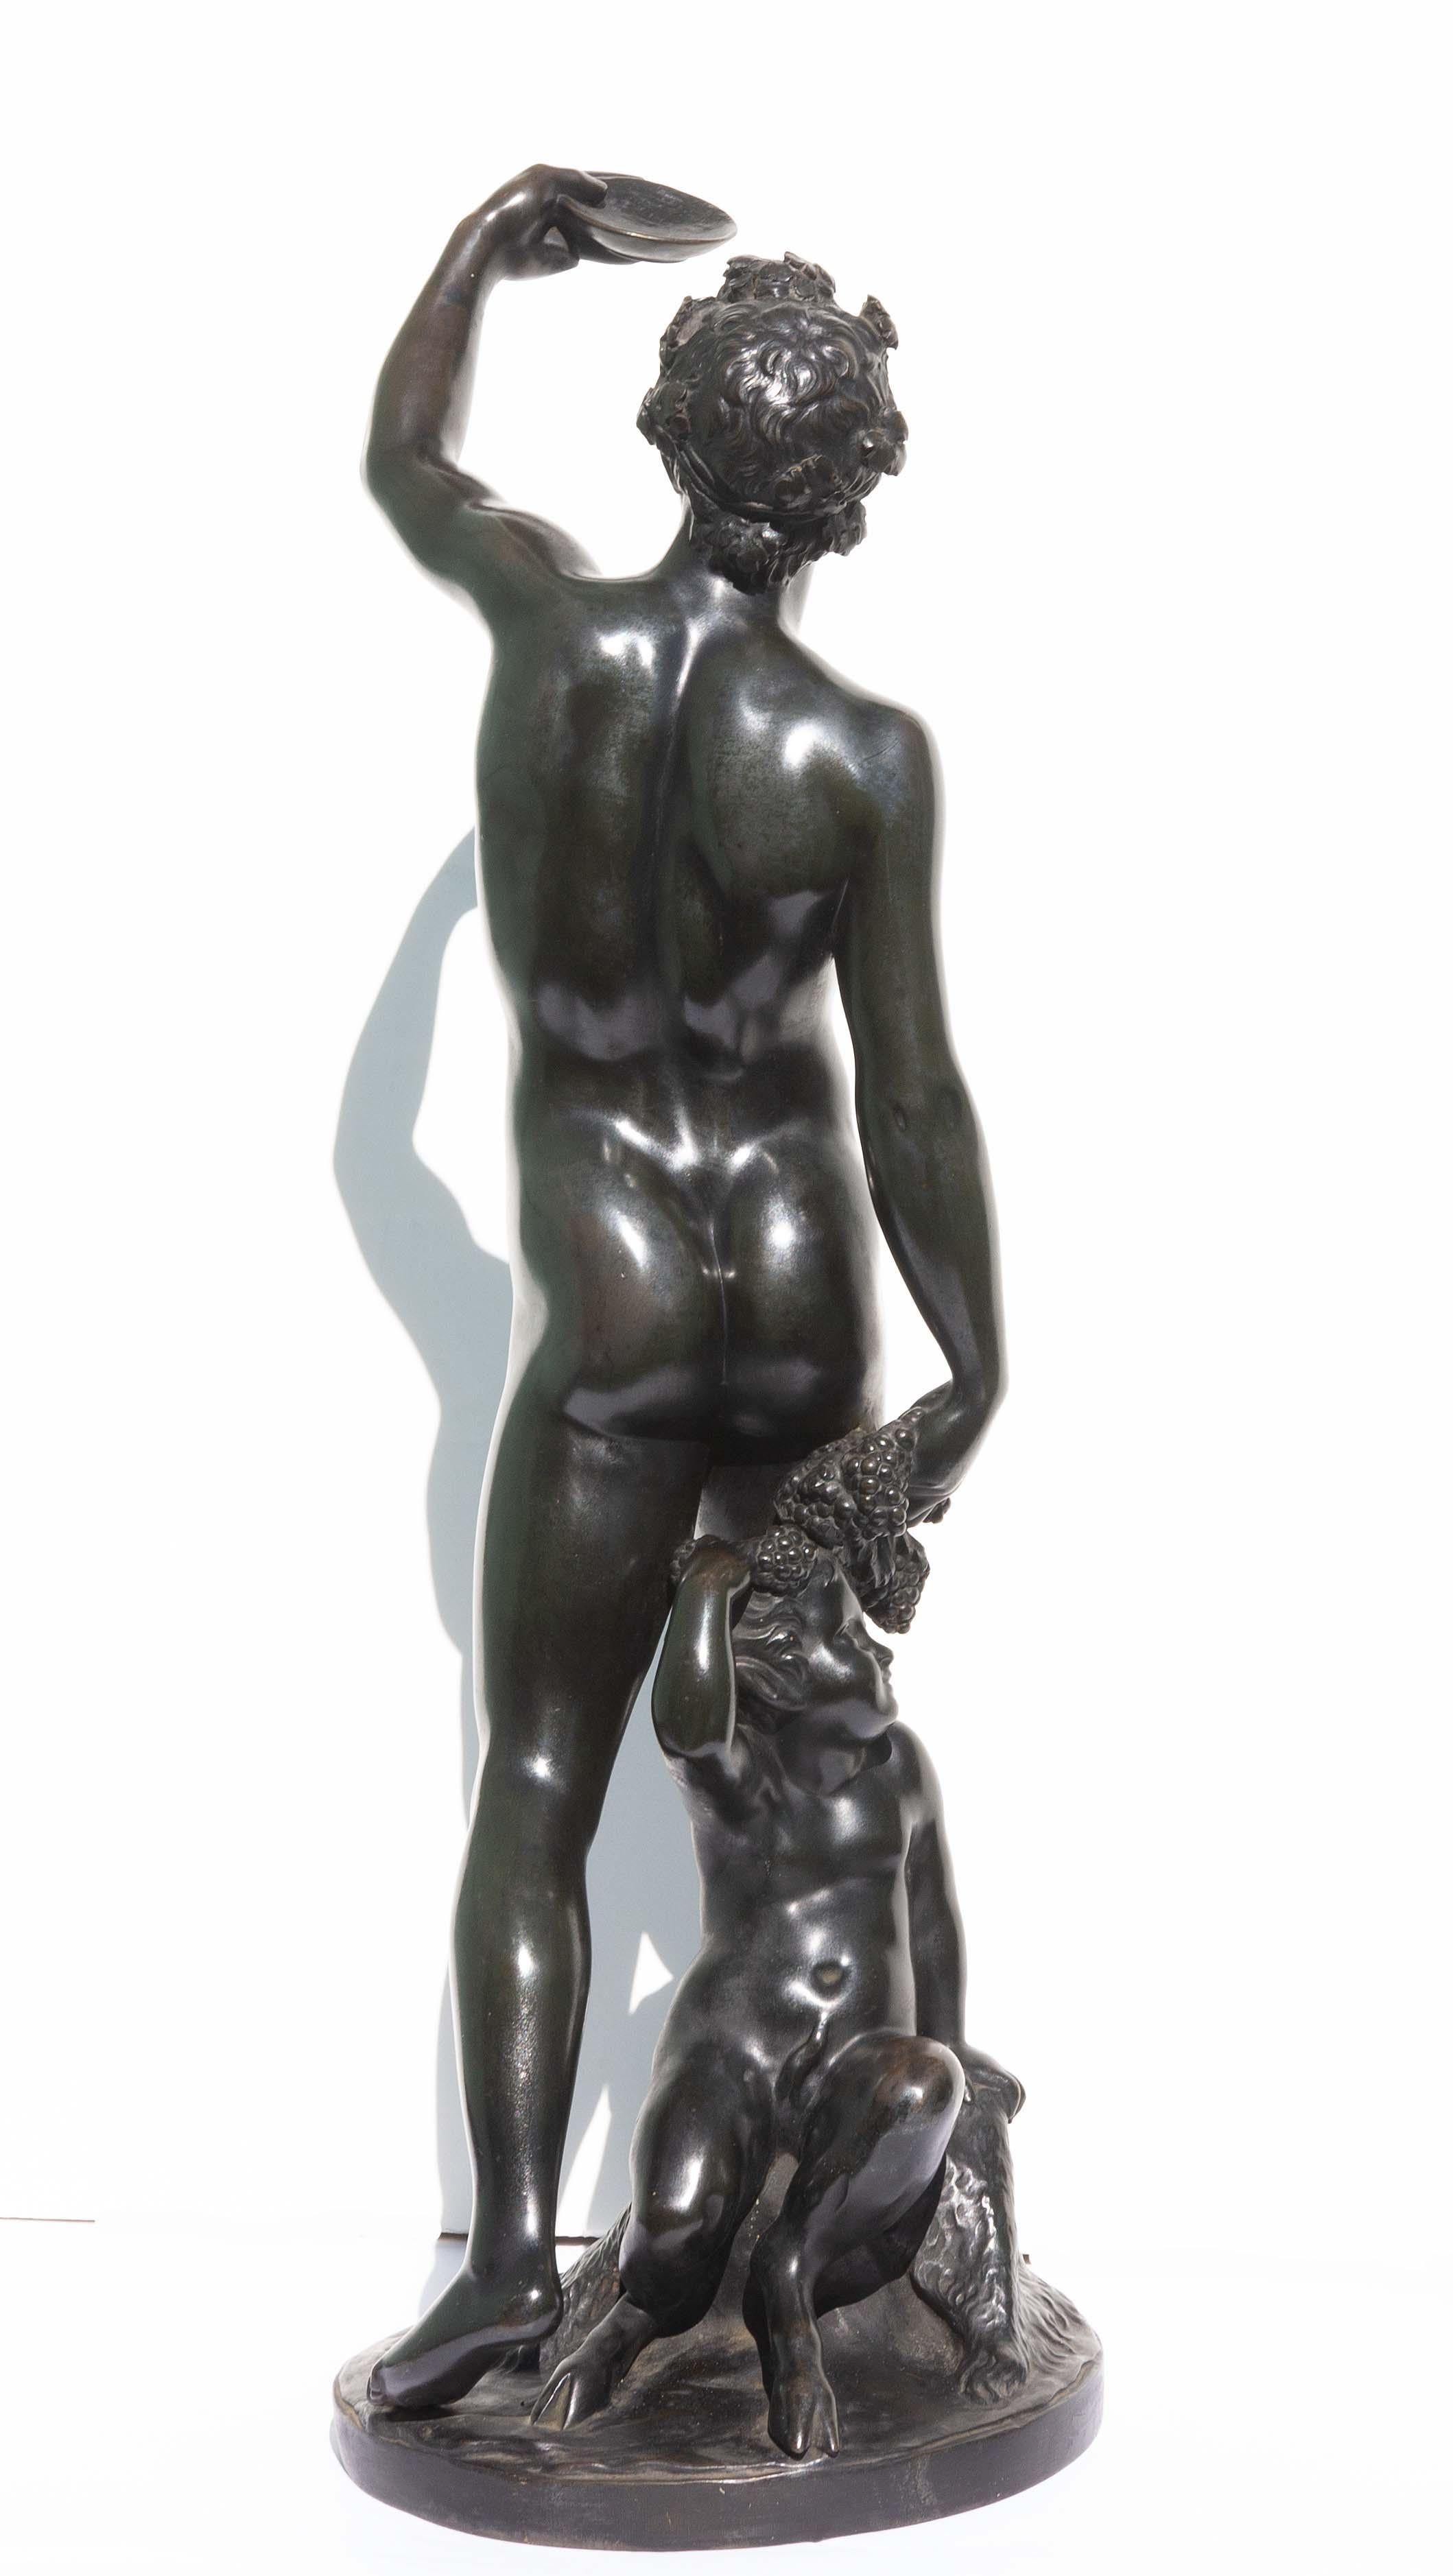 European Neoclassical Nude Sculpture of a Young Bacchus by Elias Hutter 19th Century For Sale